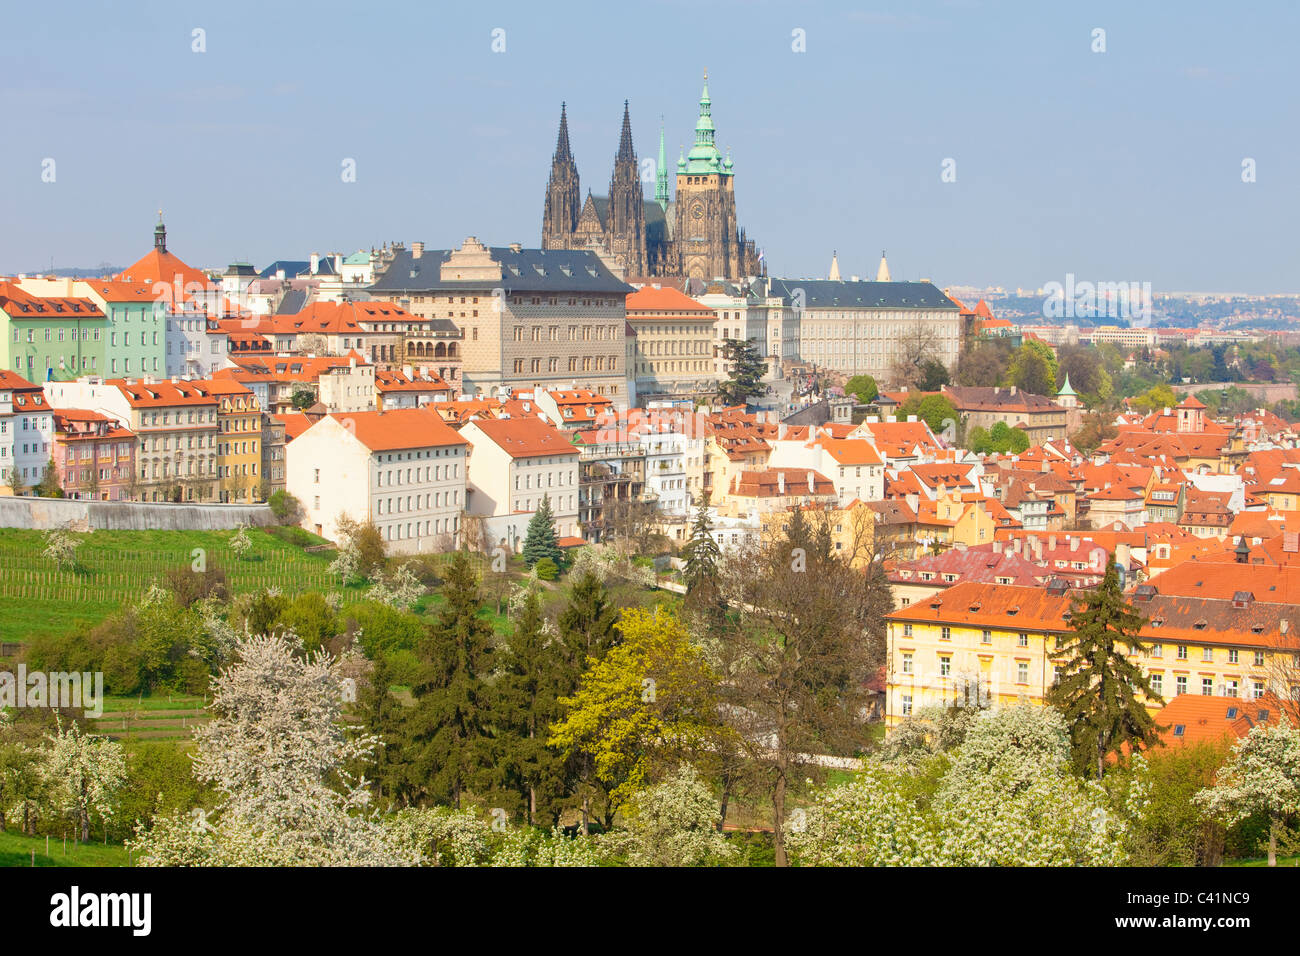 prague - view of hradcany castle and st. vitus cathedral in spring Stock Photo